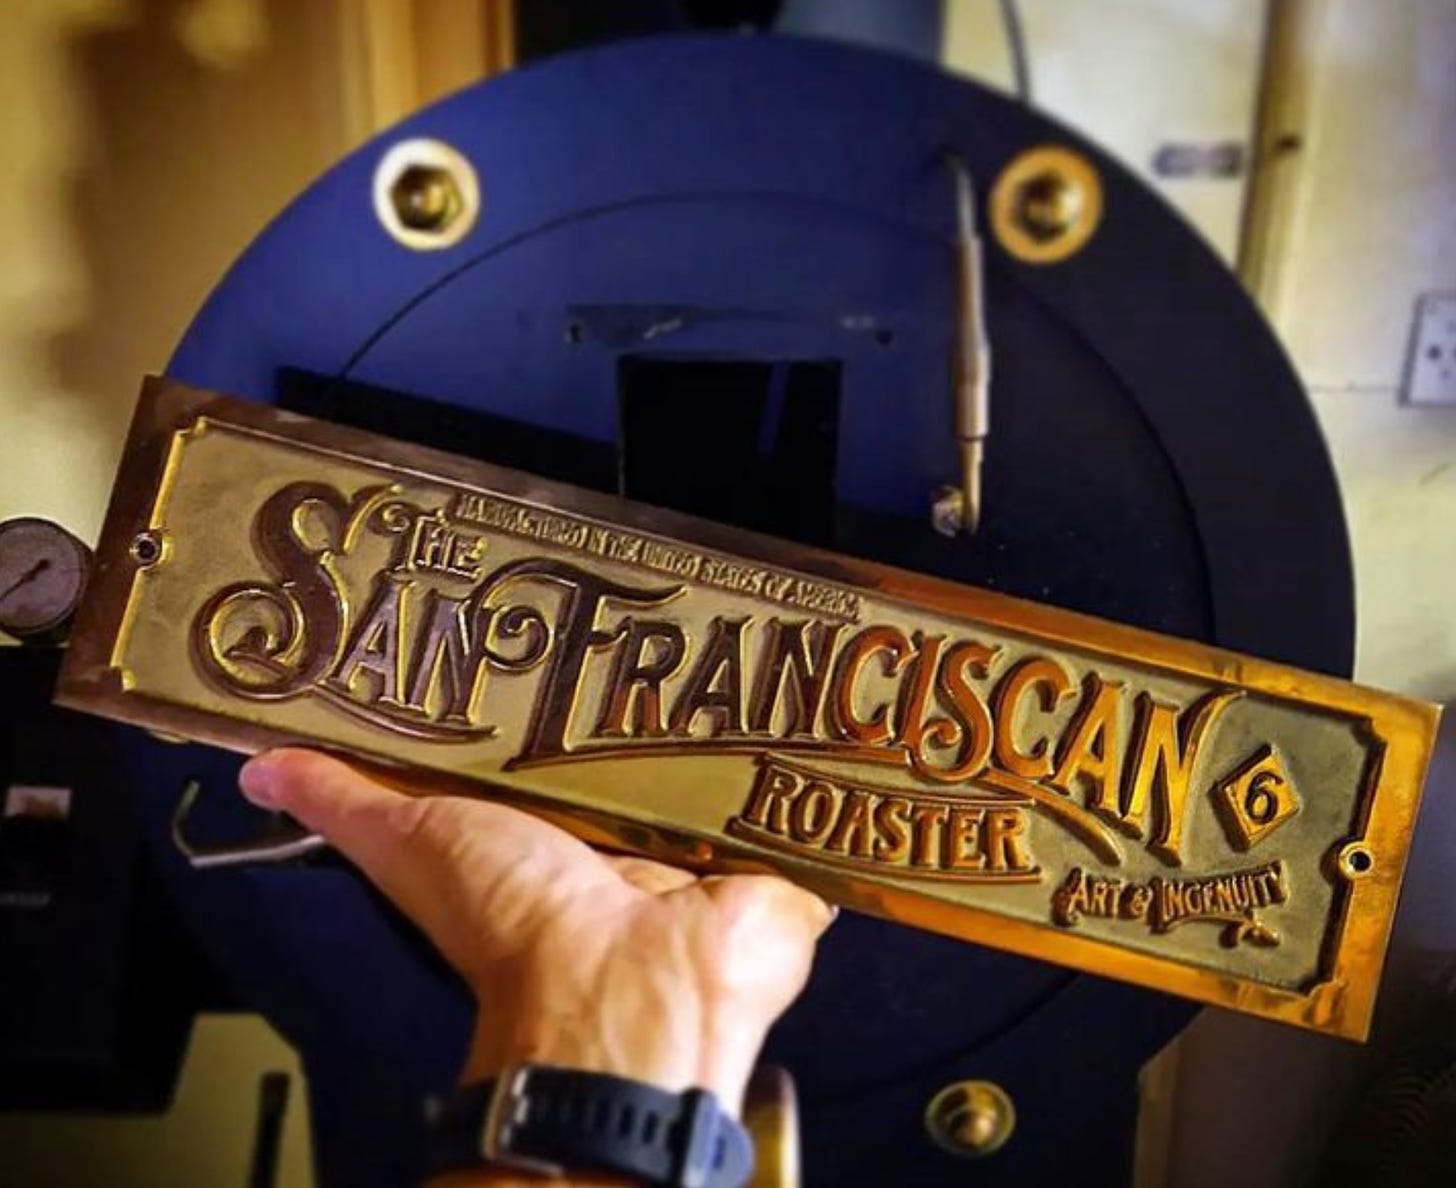 A close up of the gold plaque found on San Franciscan Coffee Roasters that says the name and motto, "Art in ingenuity."